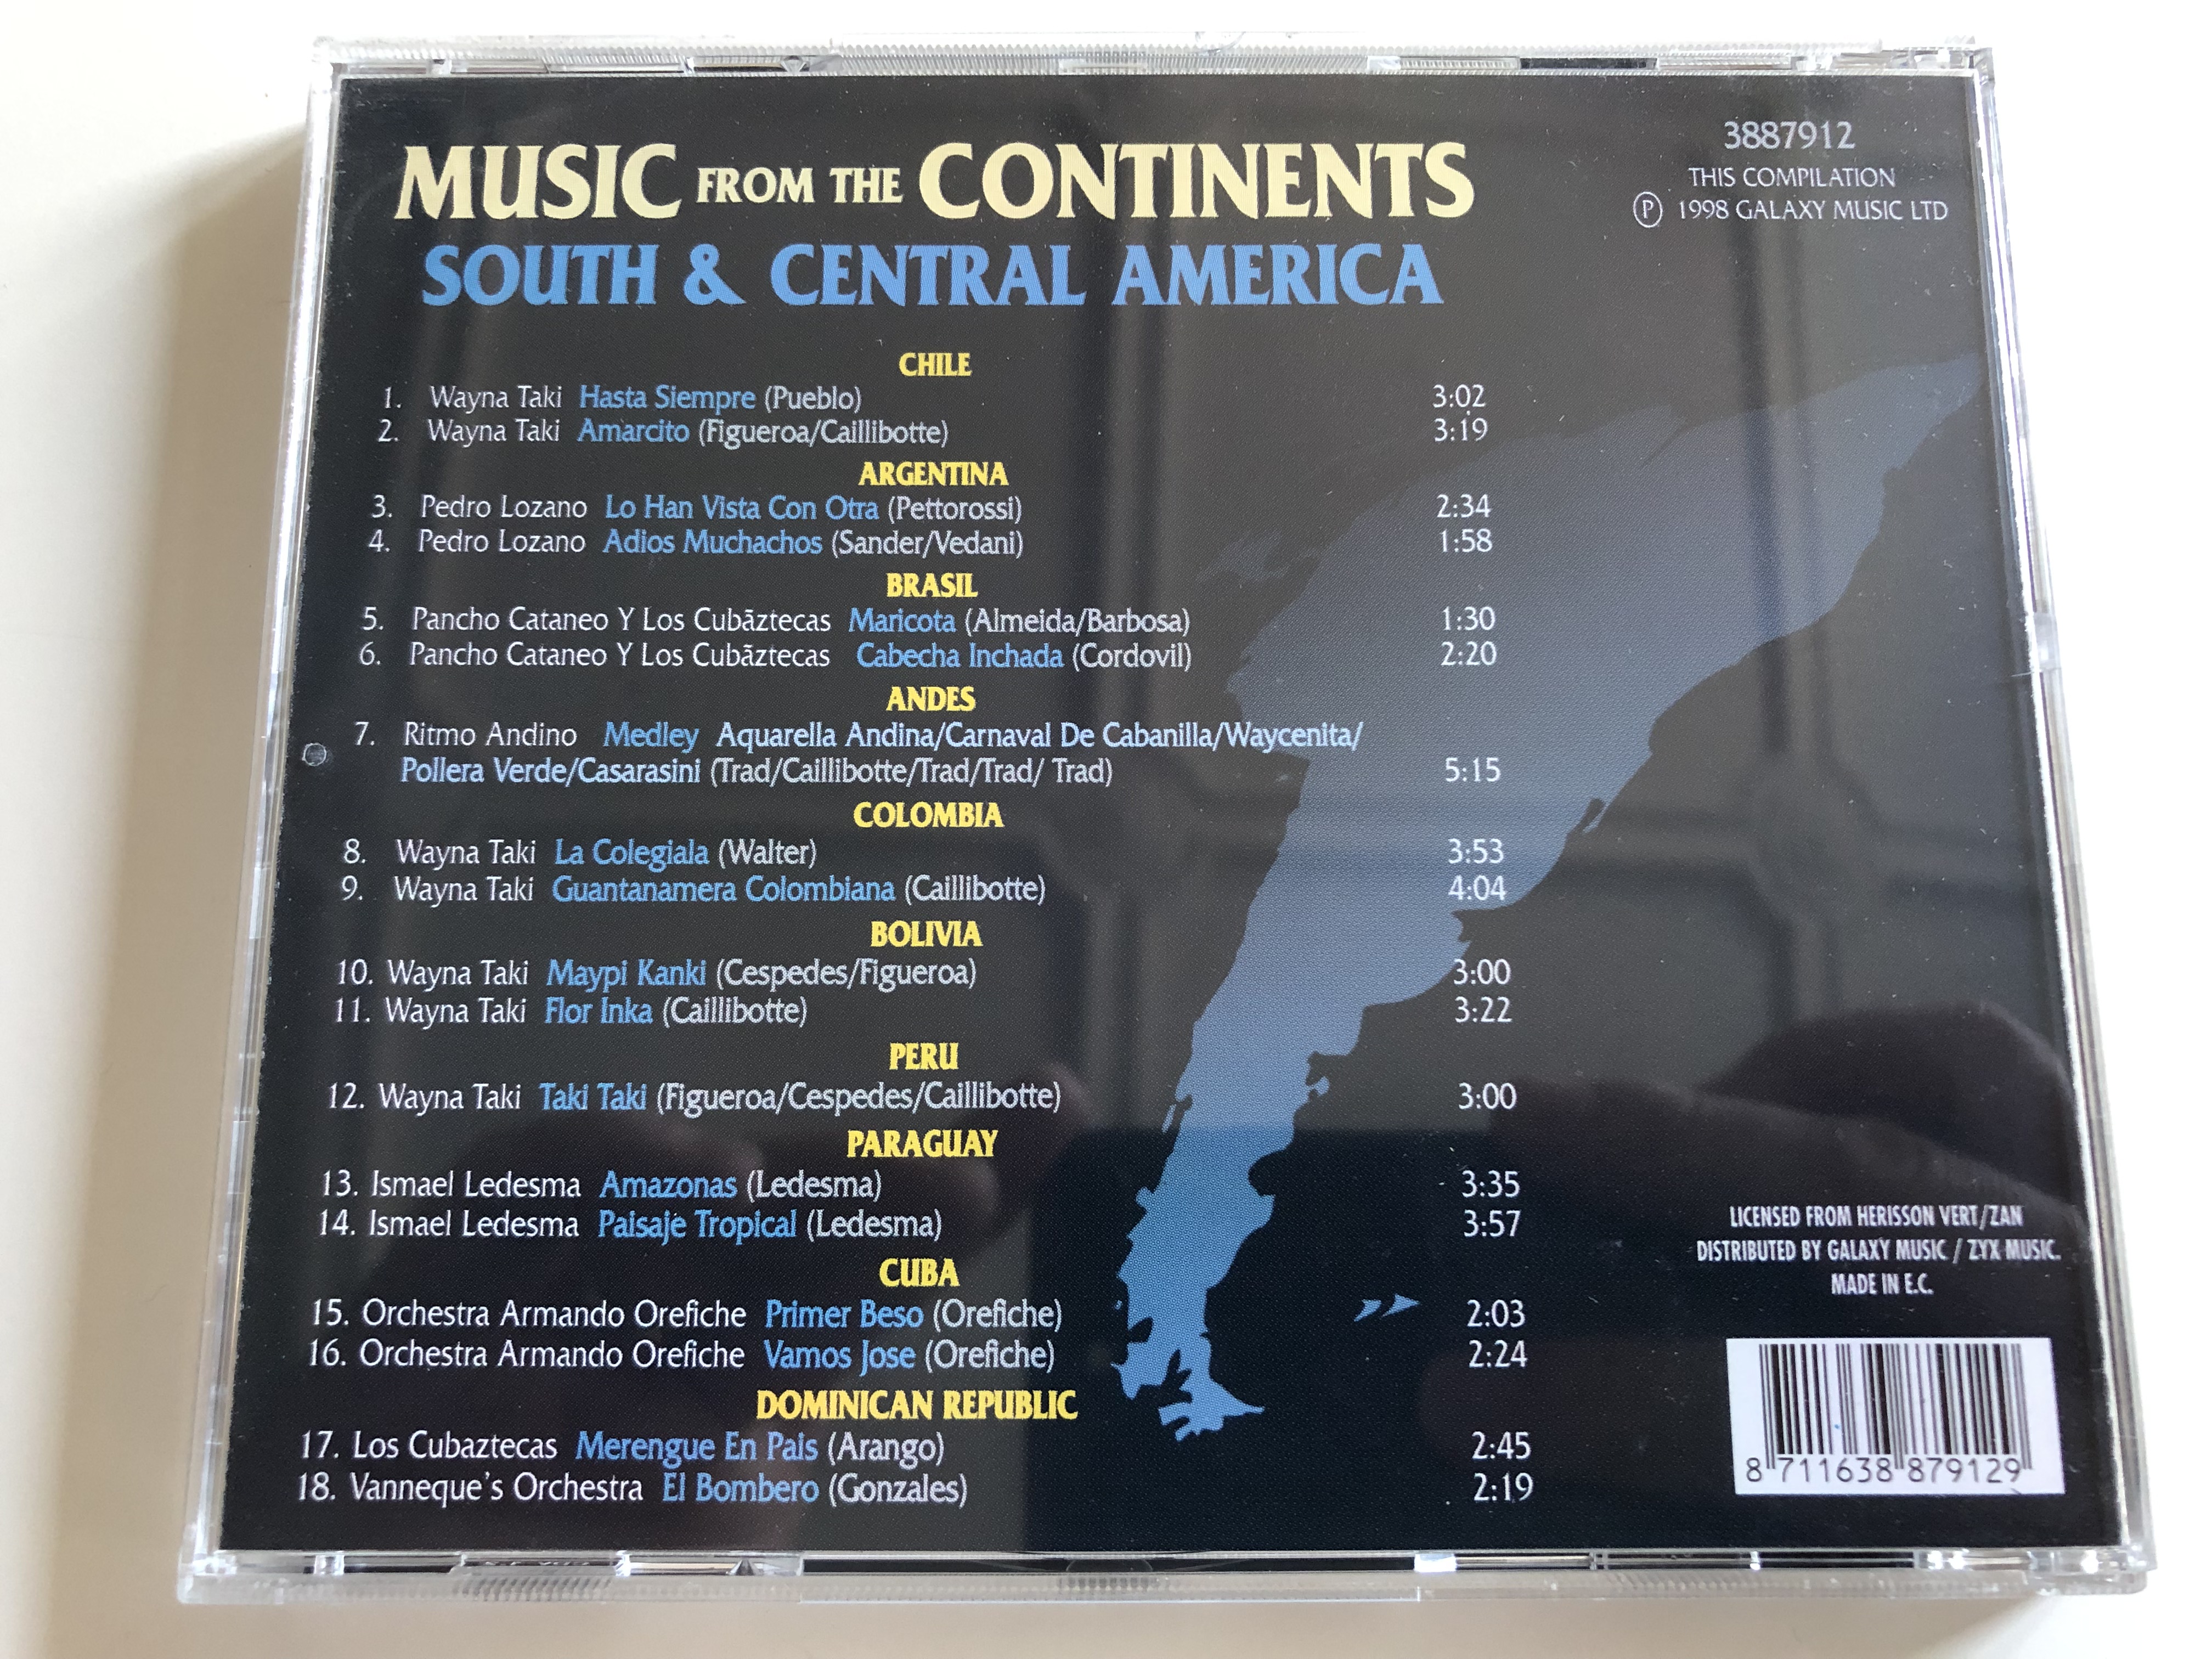 music-from-the-continents-south-central-america-galaxy-music-ltd.-audio-cd-1998-3887912-4-.jpg